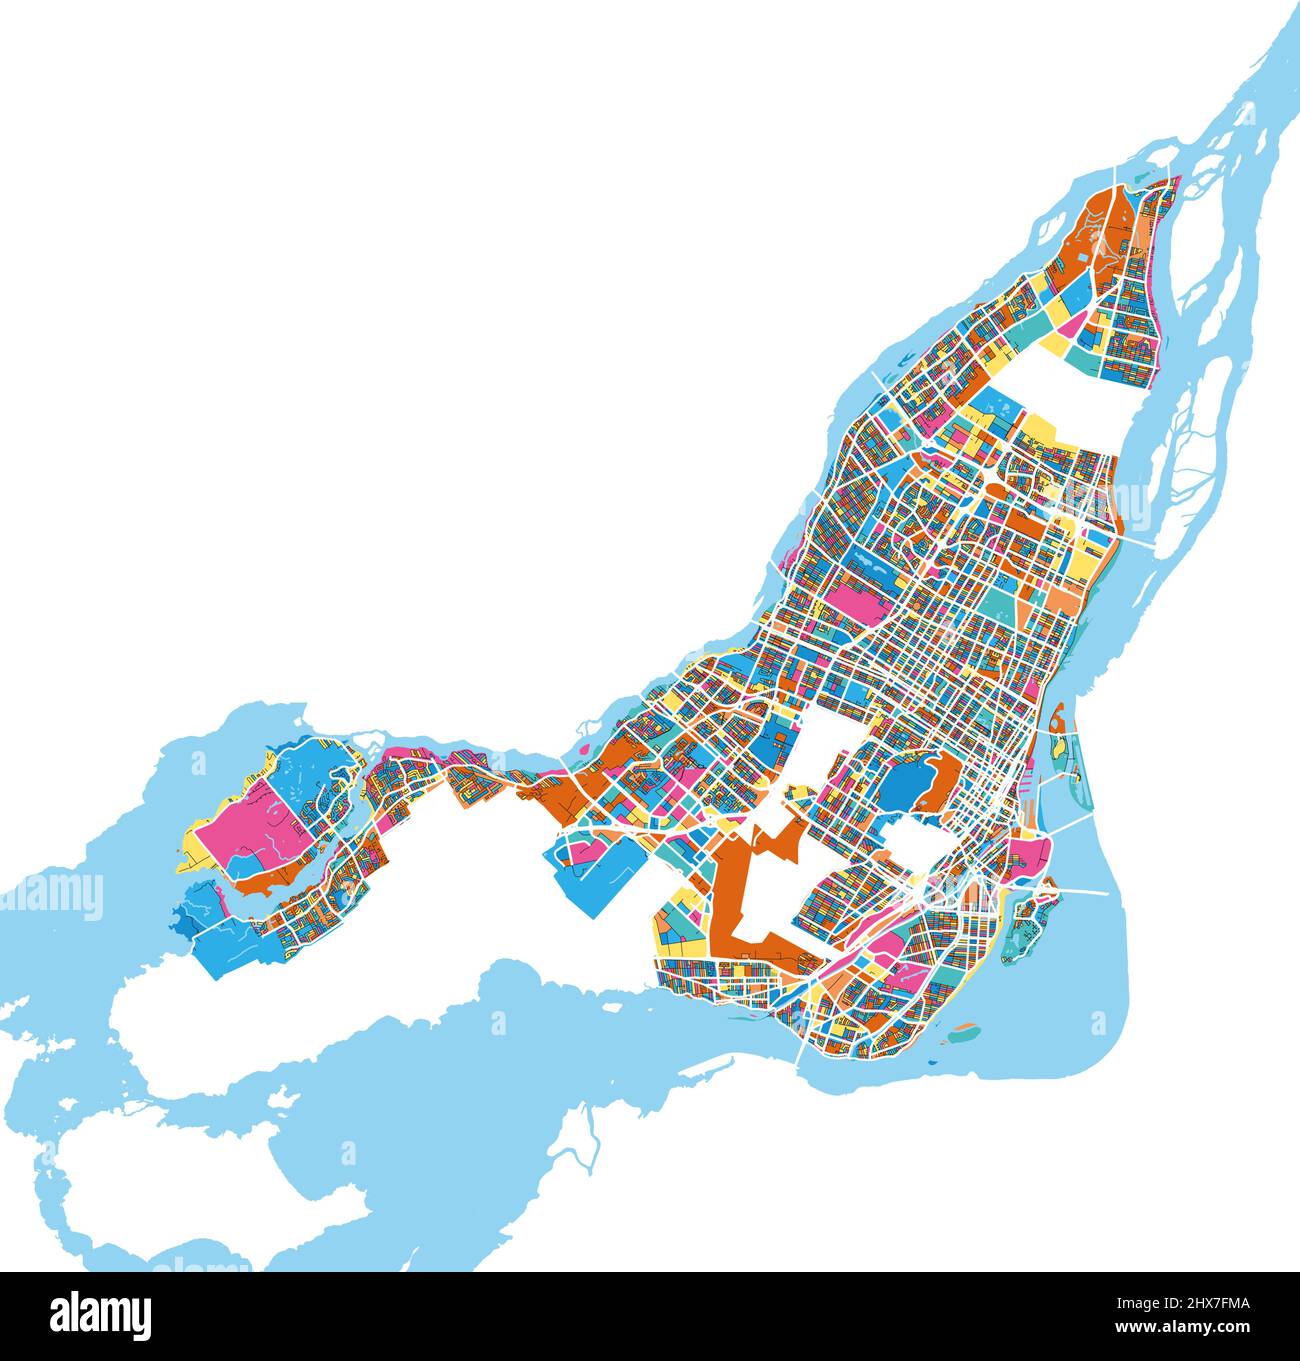 Montreal, Quebec, Canada colorful high resolution vector art map with city boundaries. White outlines for main roads. Many details. Blue shapes for wa Stock Vector